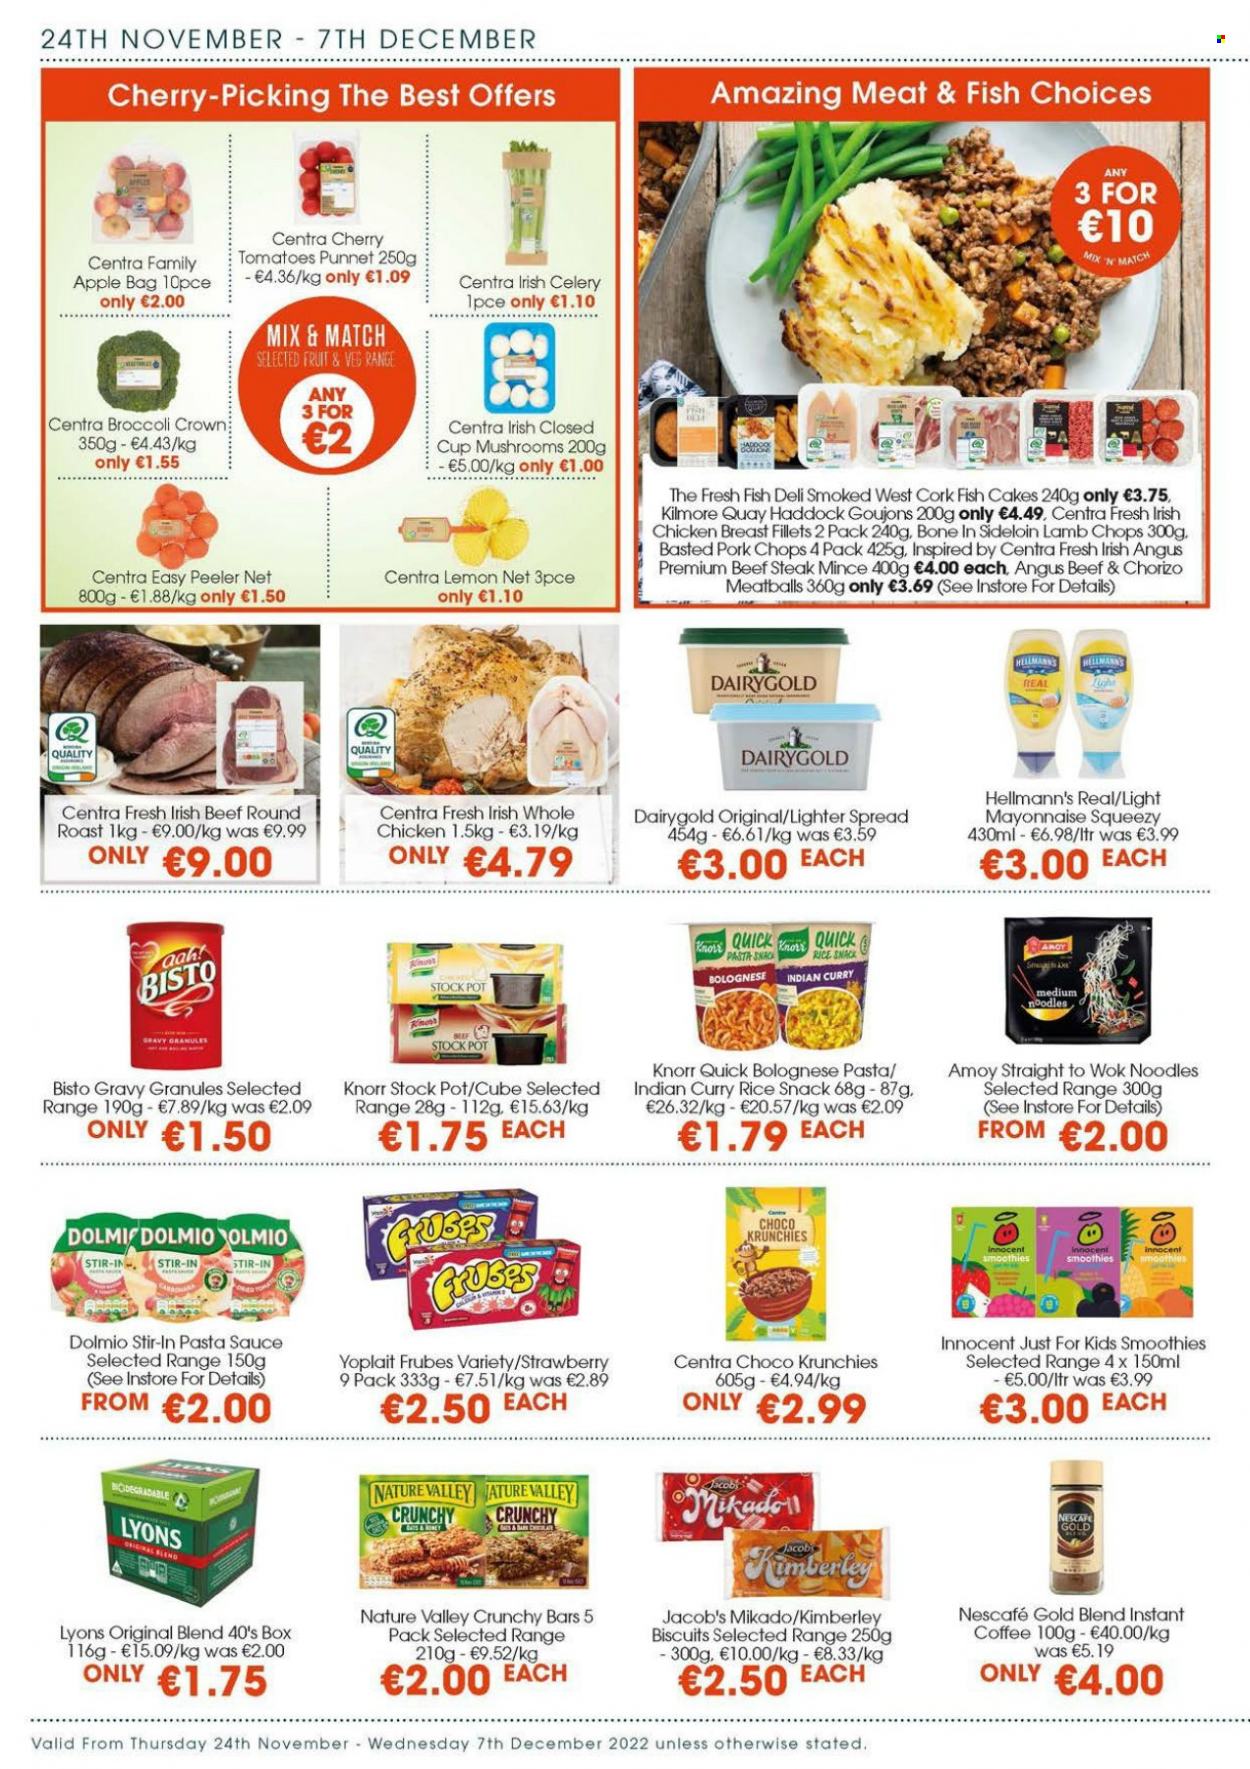 thumbnail - Centra offer  - 24.11.2022 - 07.12.2022 - Sales products - broccoli, celery, tomatoes, haddock, fish, pasta sauce, meatballs, Knorr, sauce, noodles, Frubes Variety, Yoplait, mayonnaise, Hellmann’s, fish cake, snack, biscuit, Nature Valley, rice, stockpot, smoothie, Lyons, instant coffee, Nescafé, whole chicken, chicken breasts, beef meat, beef steak, steak, round roast, pork chops, pork meat, lamb chops, lamb meat, Just For Kids, bag, pot, wok, peeler. Page 2.